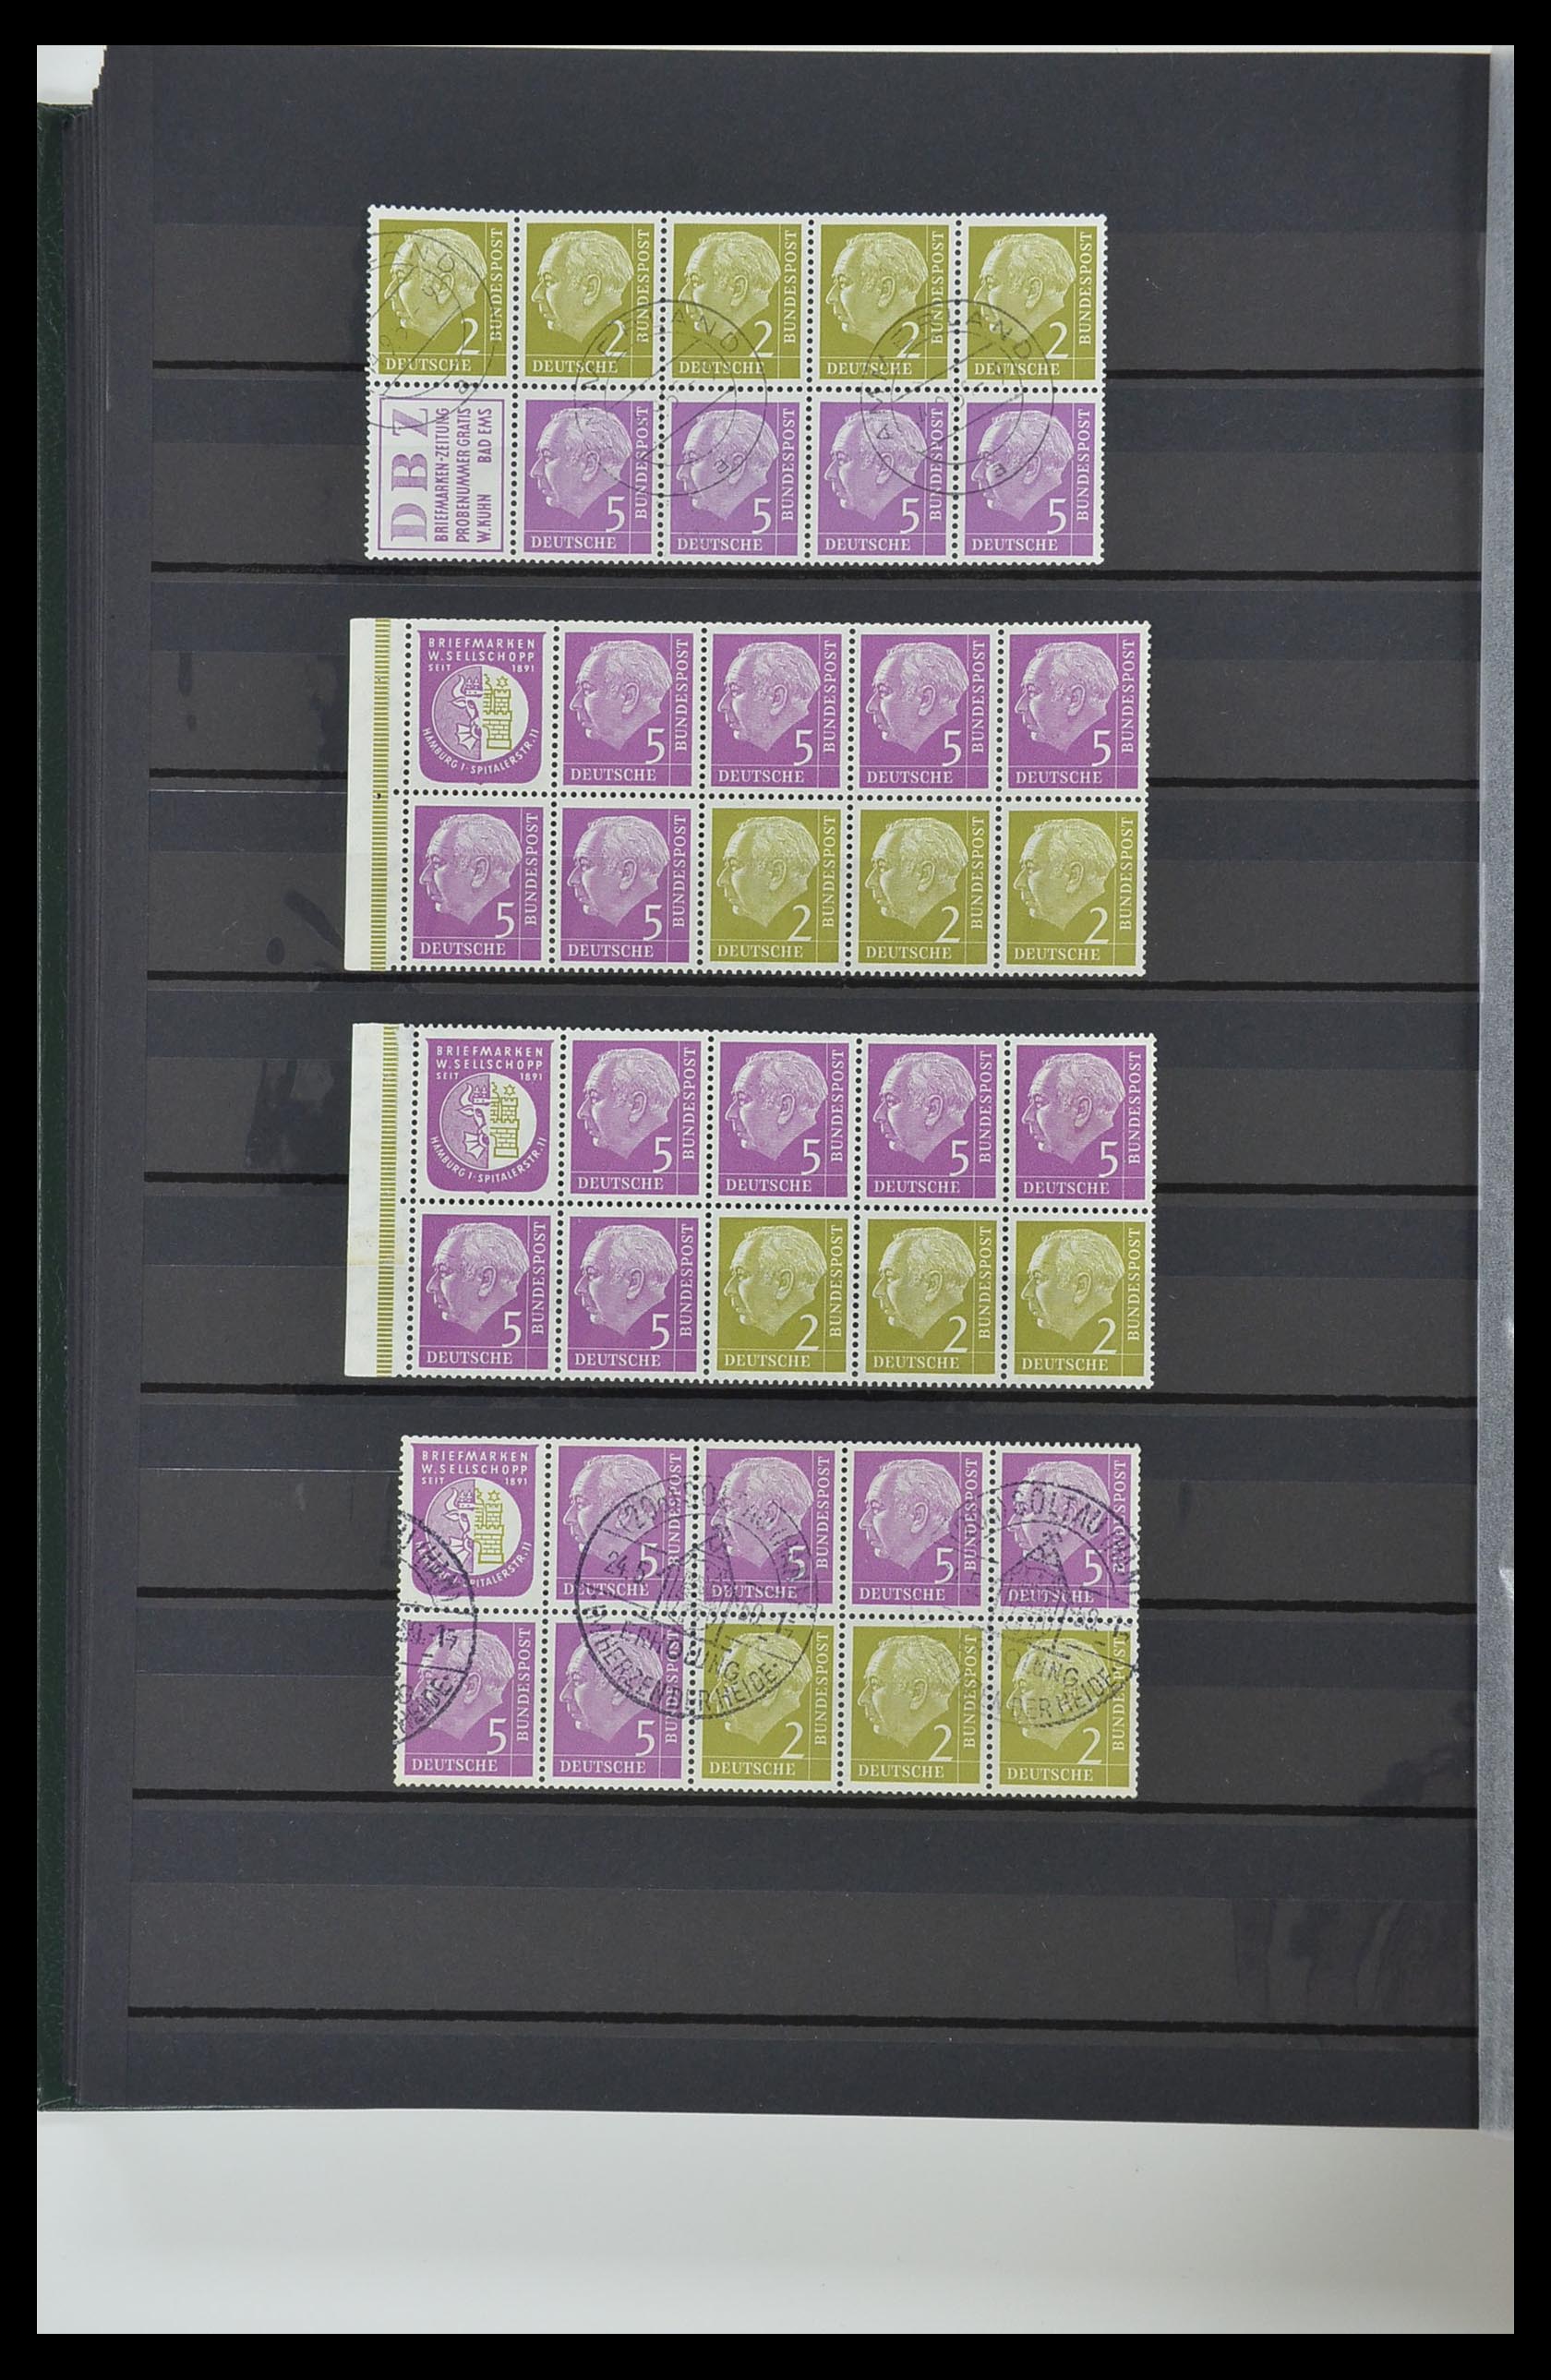 33275 034 - Stamp collection 33275 Bundespost combinations 1951-1960.